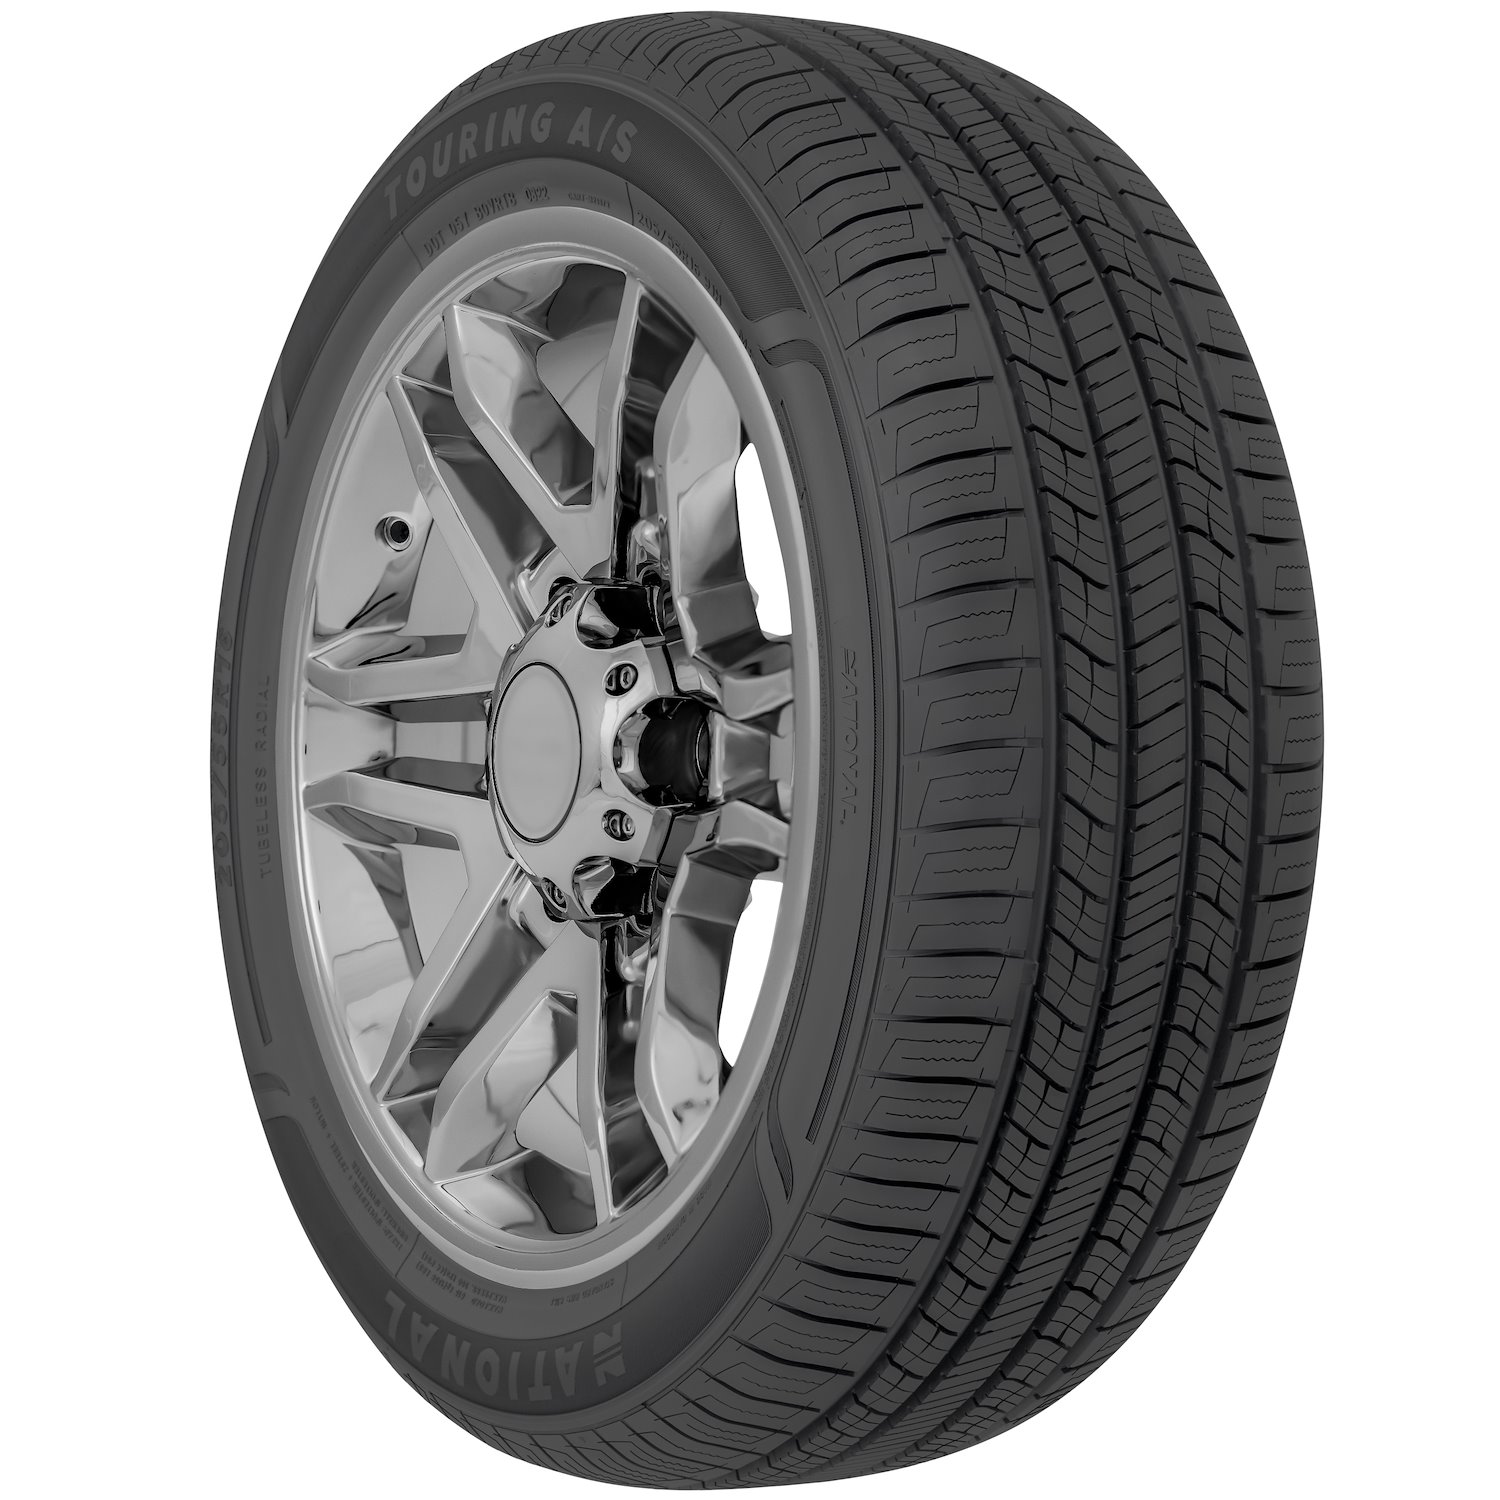 NLR58 Touring A/S Tire, 215/50R17